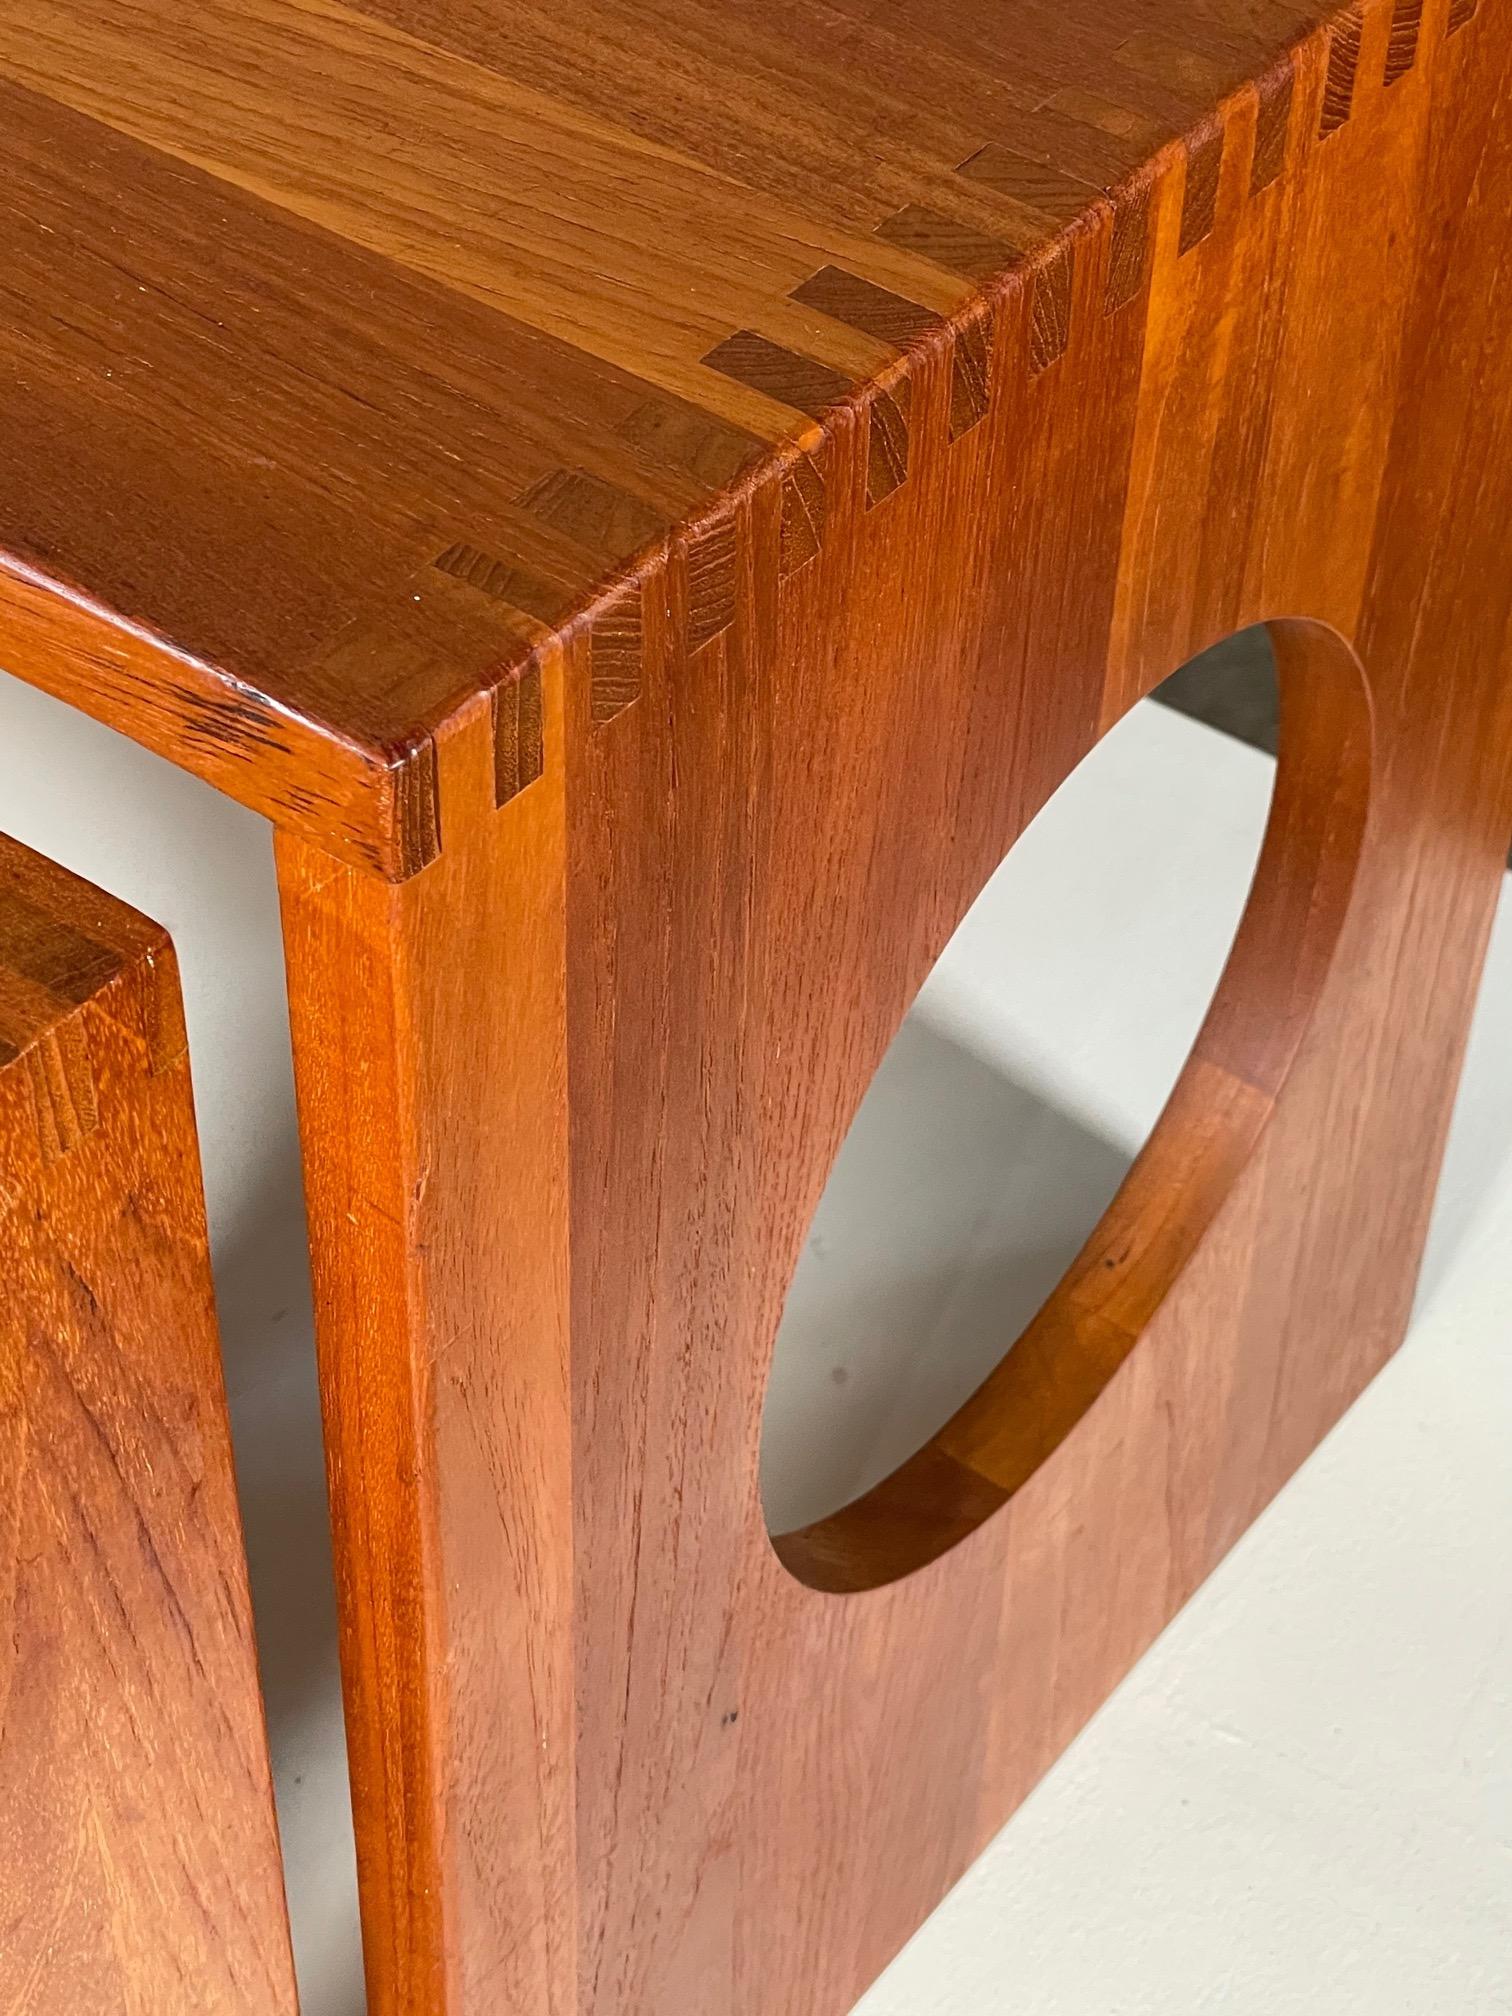 A set of three classic nesting tables designed by Jens Quistgaard, produced by Richard Nissen, Denmark, ca' 1970's. Made of teak with characteristic finger joints and circular cut outs. can be used as side tables or nesting tables, etc.. The